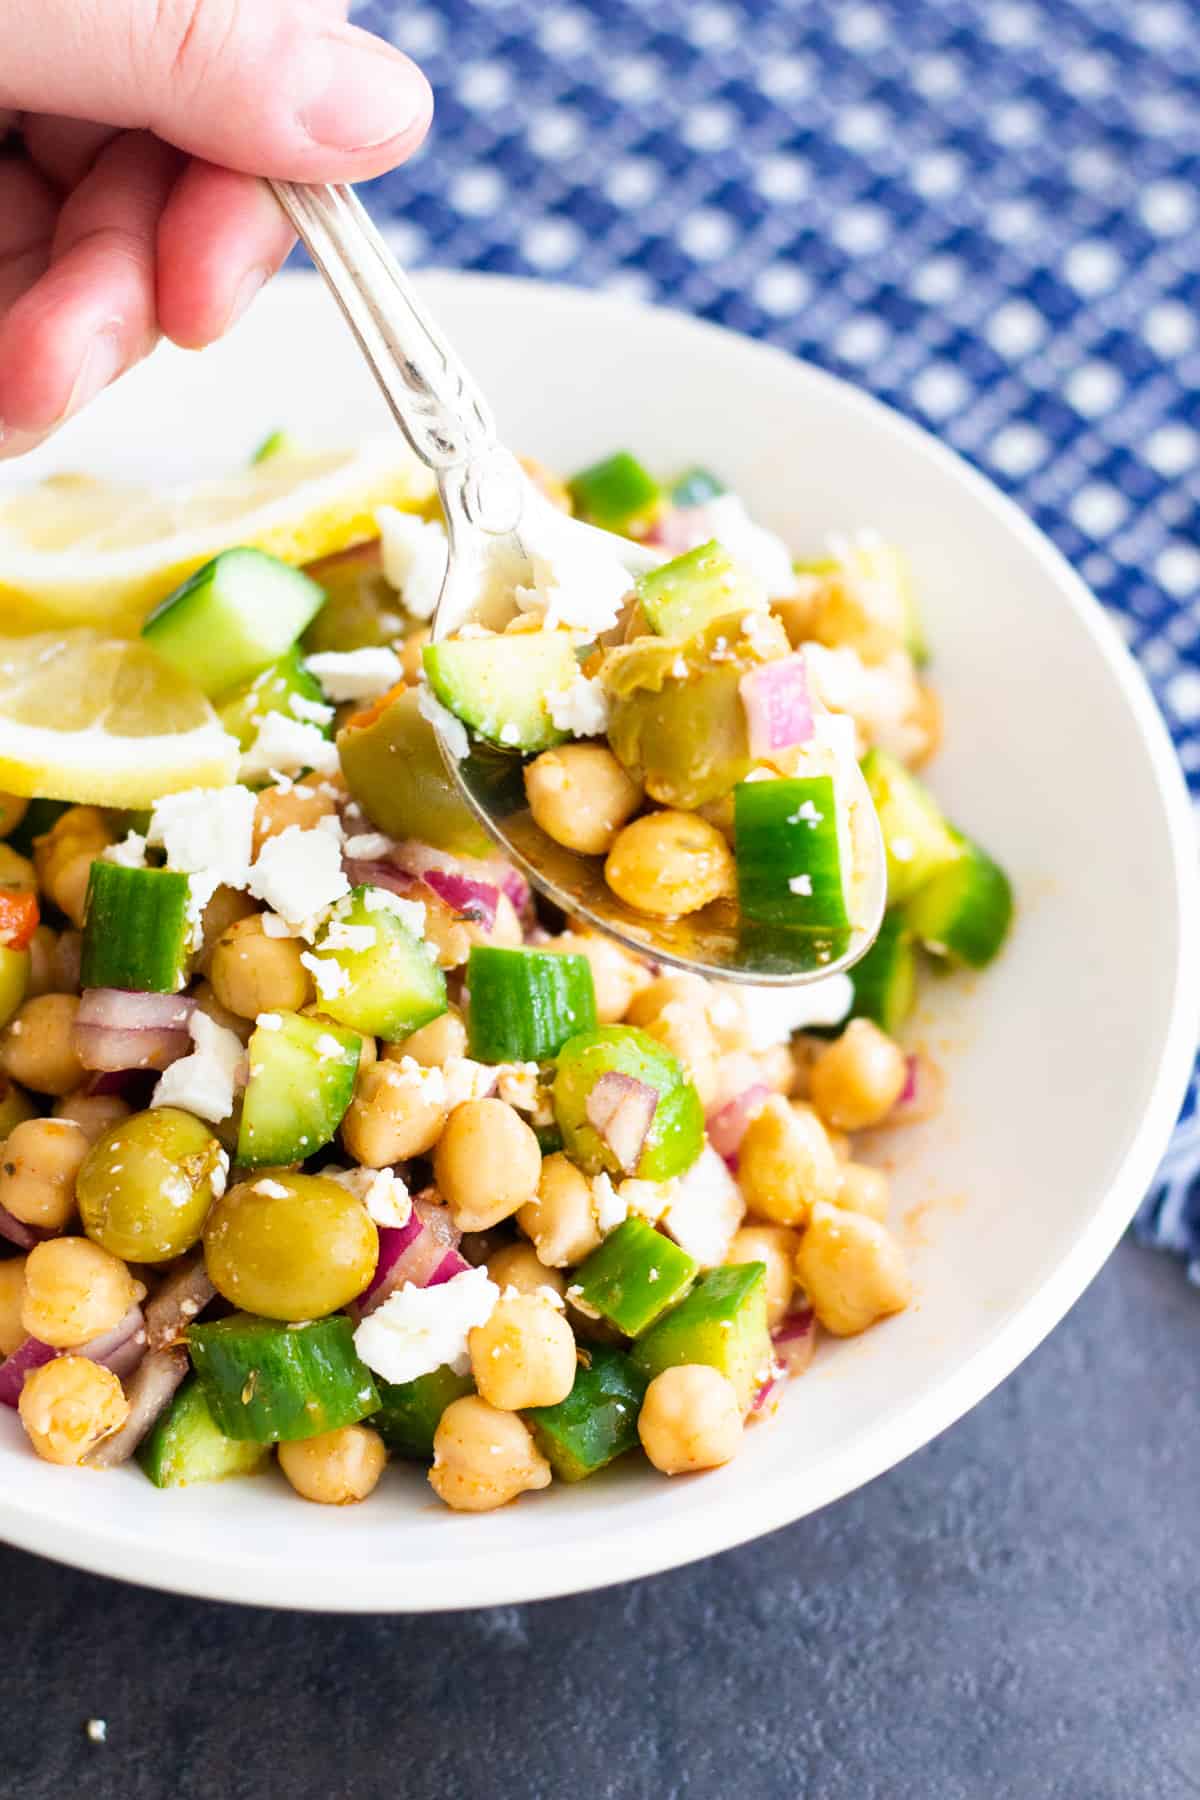 Chickpea Salad made Greek style. This salad is very simple and easy.